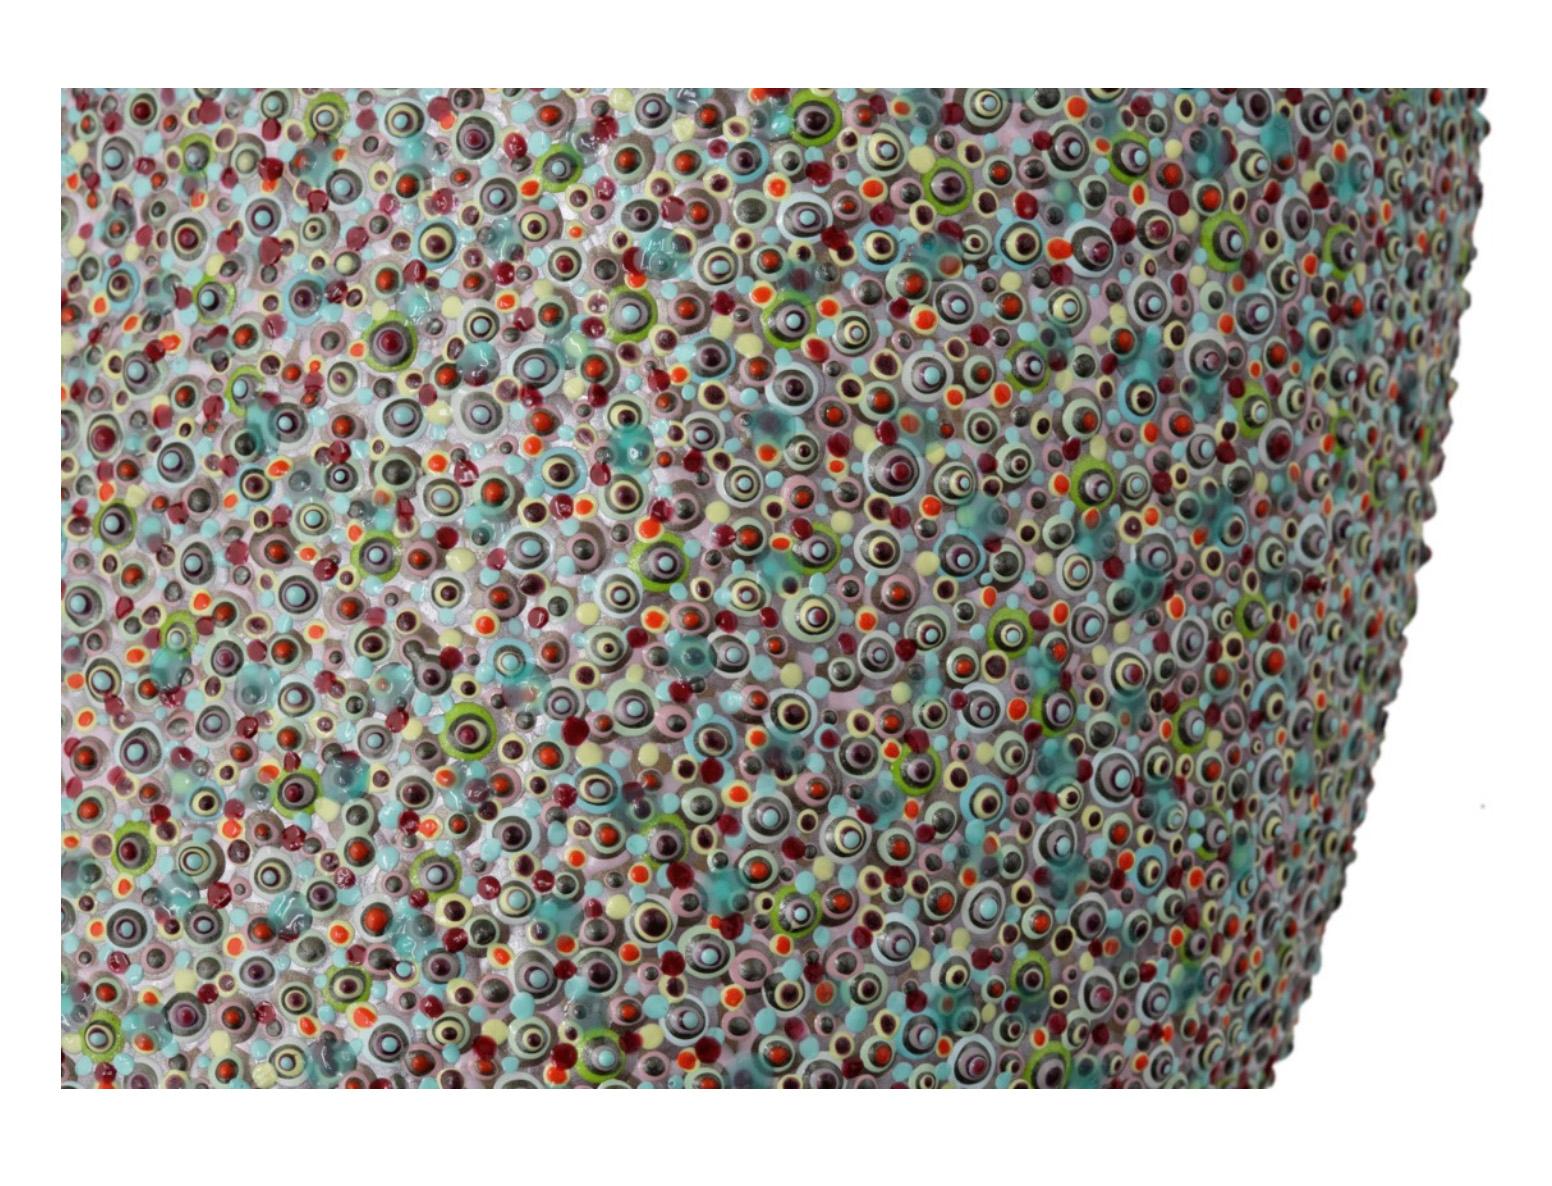 An original wall sculpture by American female artist Felice Koenig.

Koenig covers carved polystyrene forms with layers upon layers of acrylic dots.  The works take Koenig around 6 months to complete.  

Felice Koenig is a visual artist and